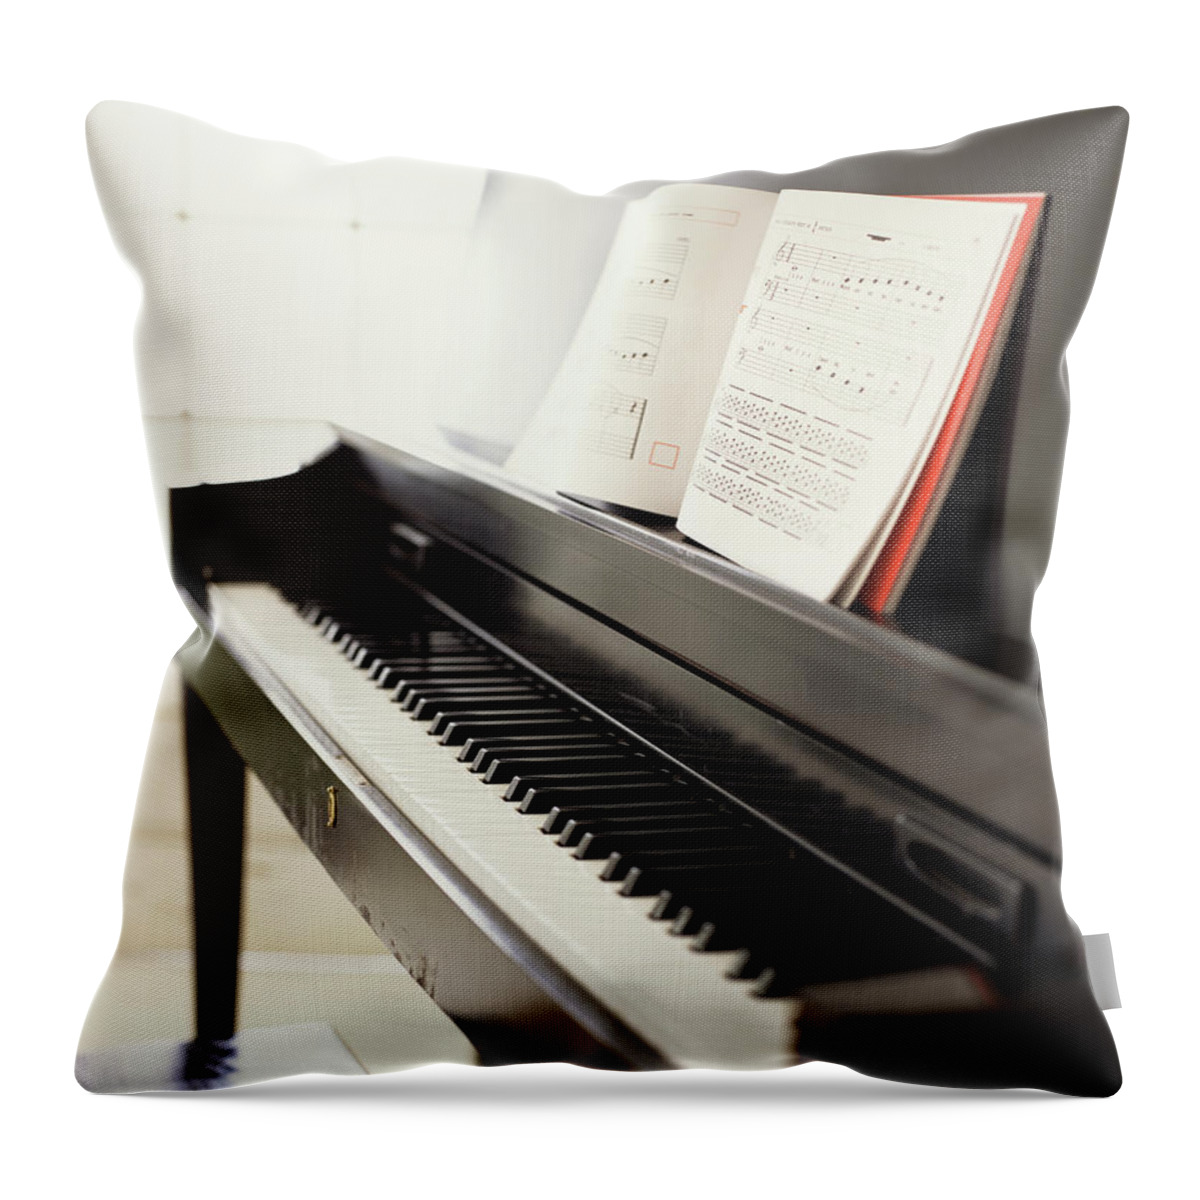 Piano Throw Pillow featuring the photograph Piano With Sheet Music by James Baigrie